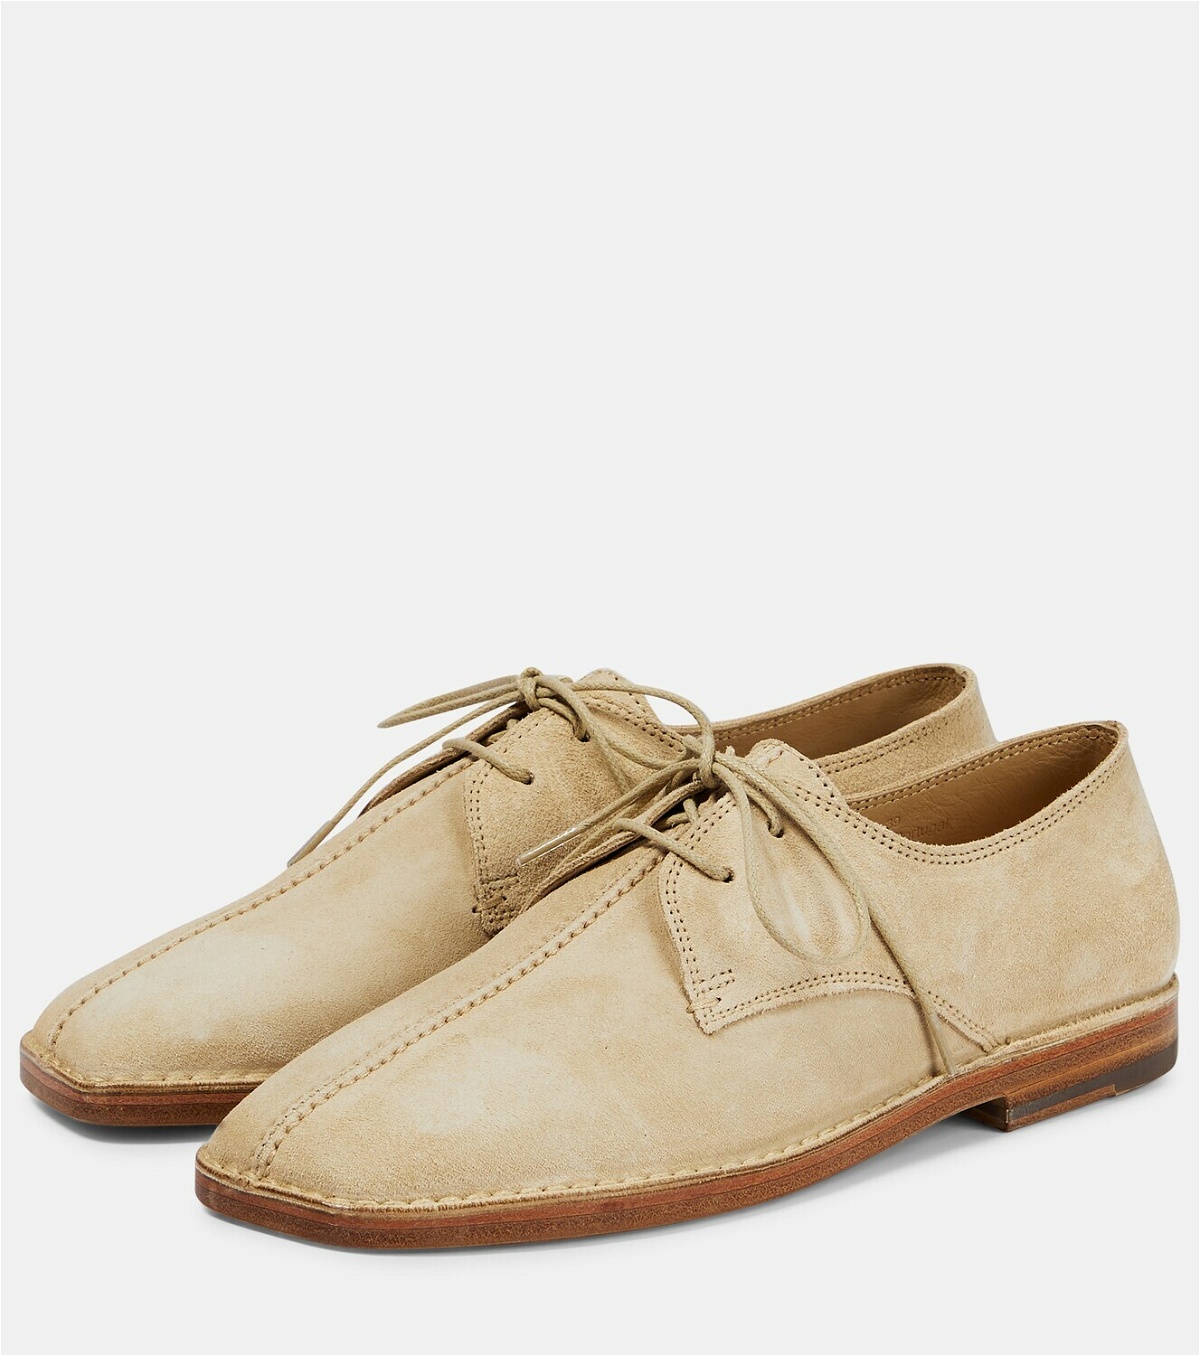 Lemaire - Suede Derby shoes Lemaire